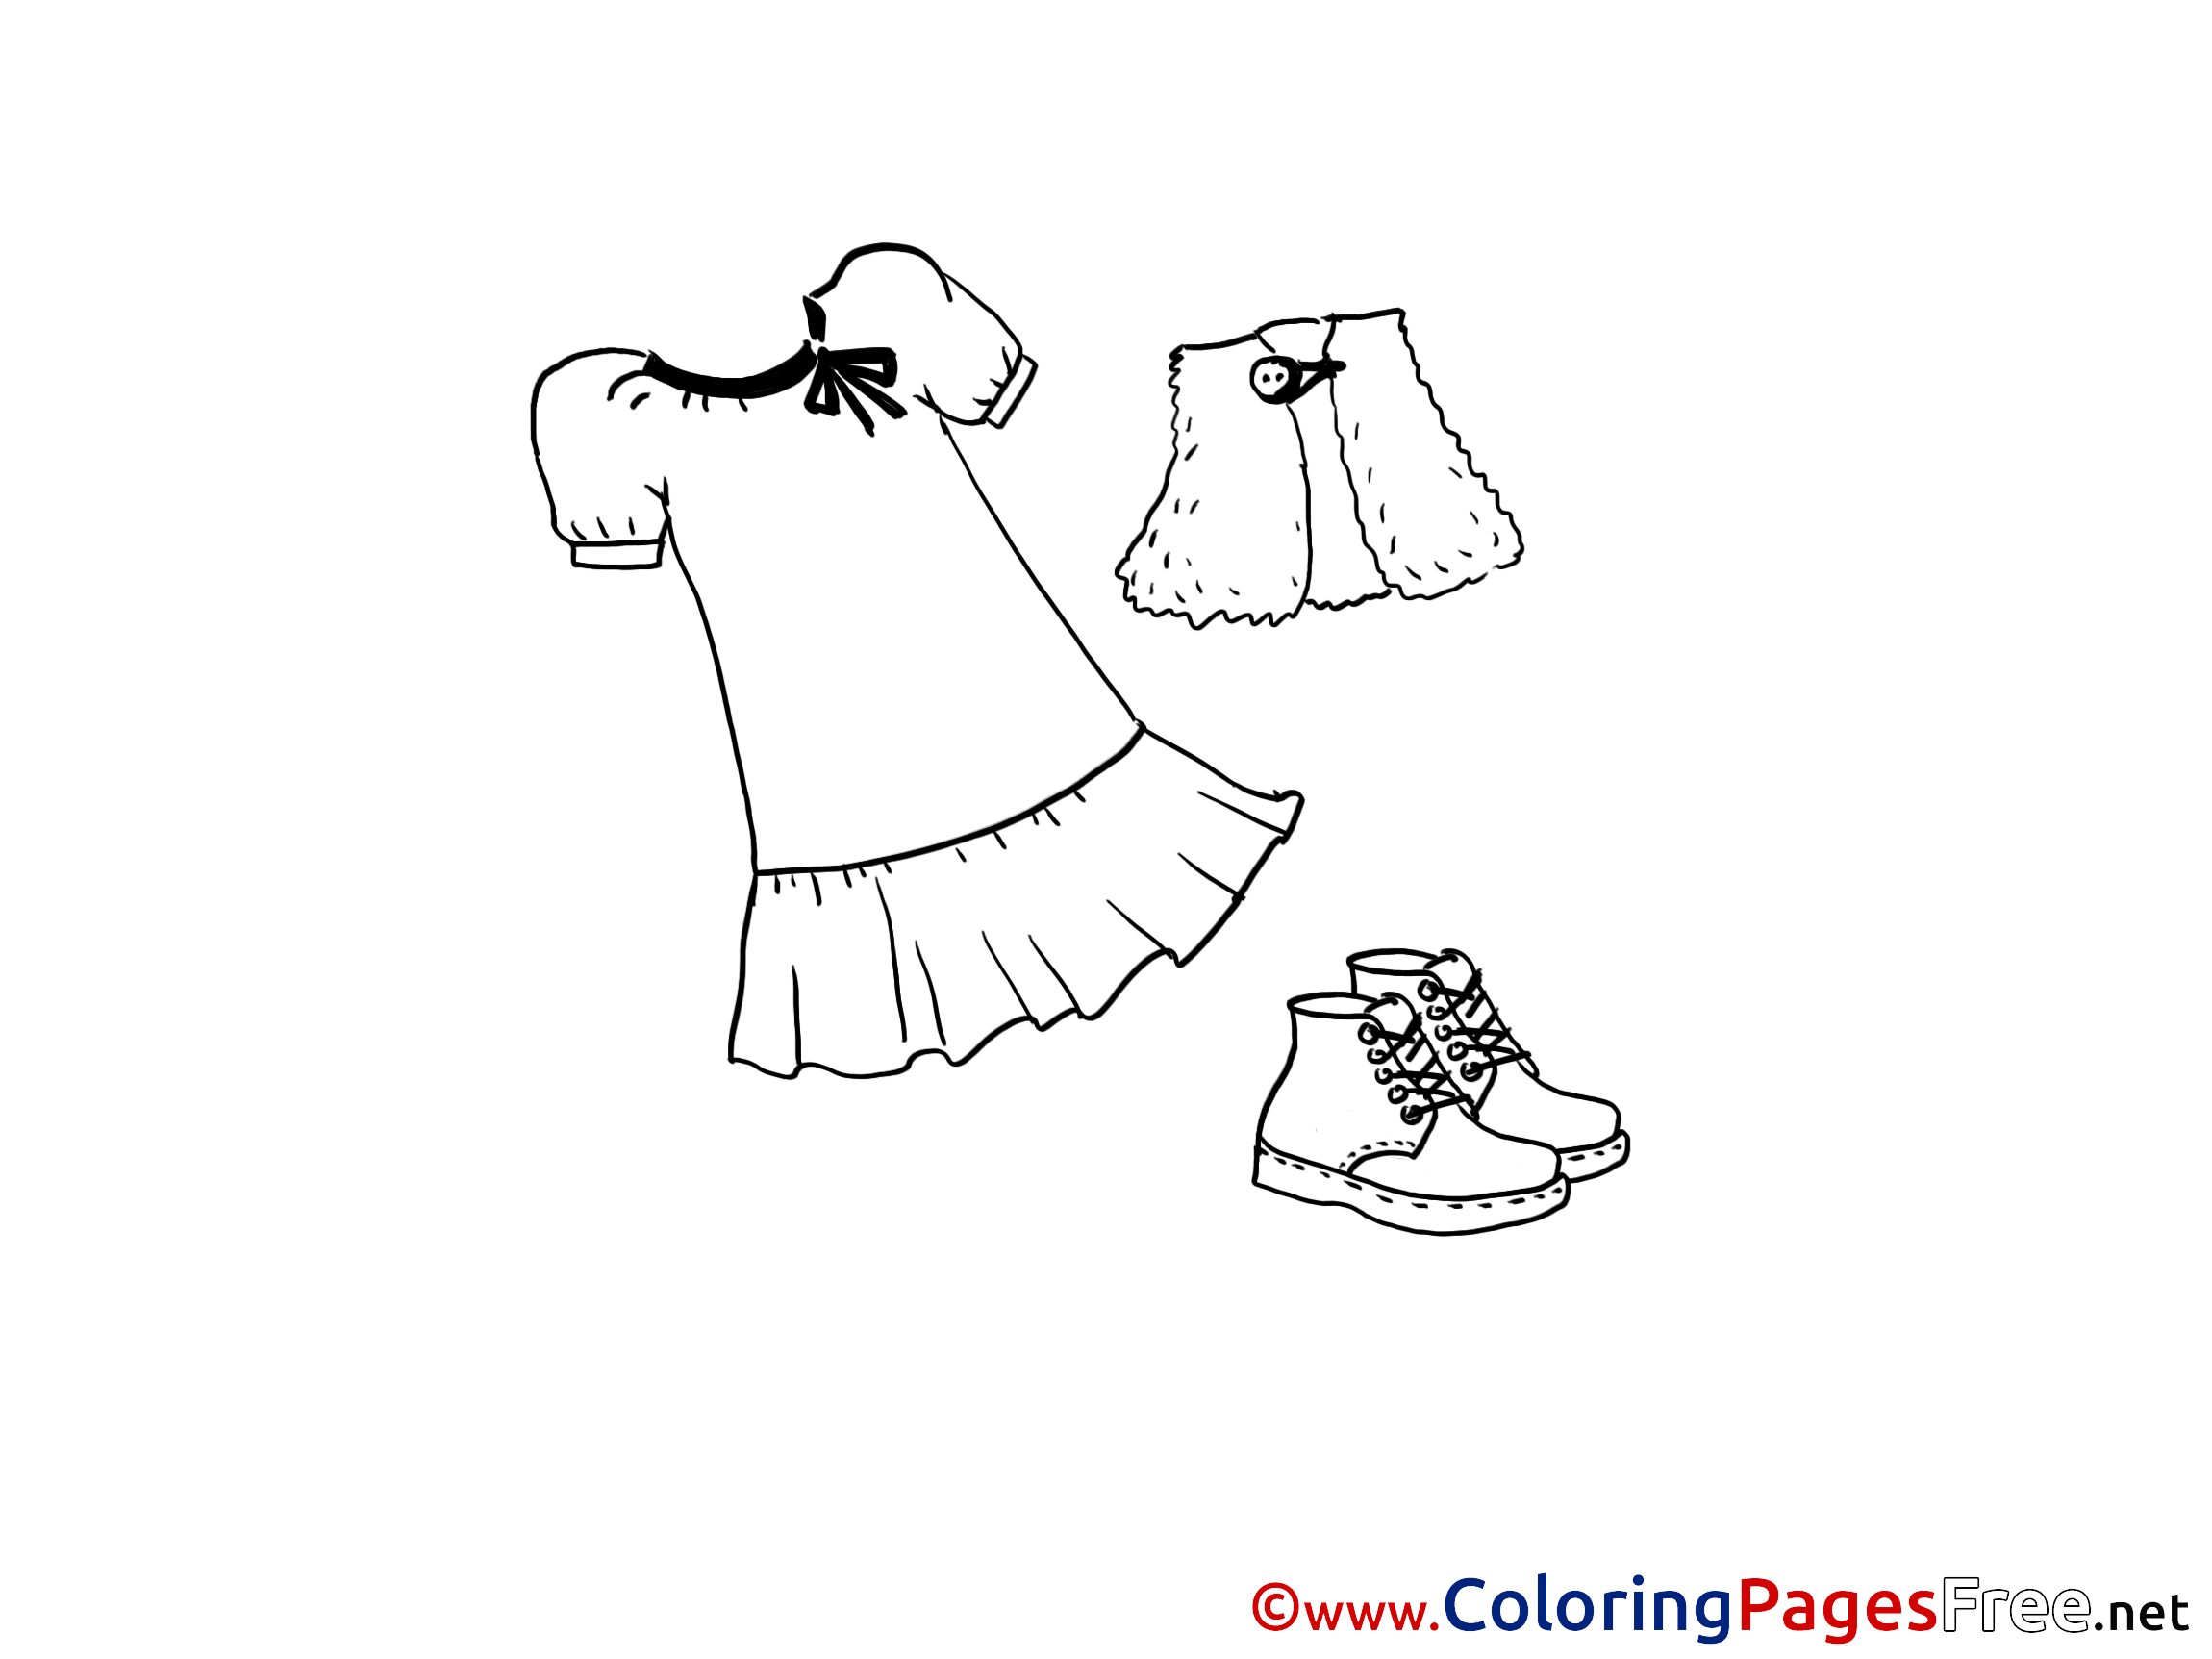 Dress for free Coloring Pages download